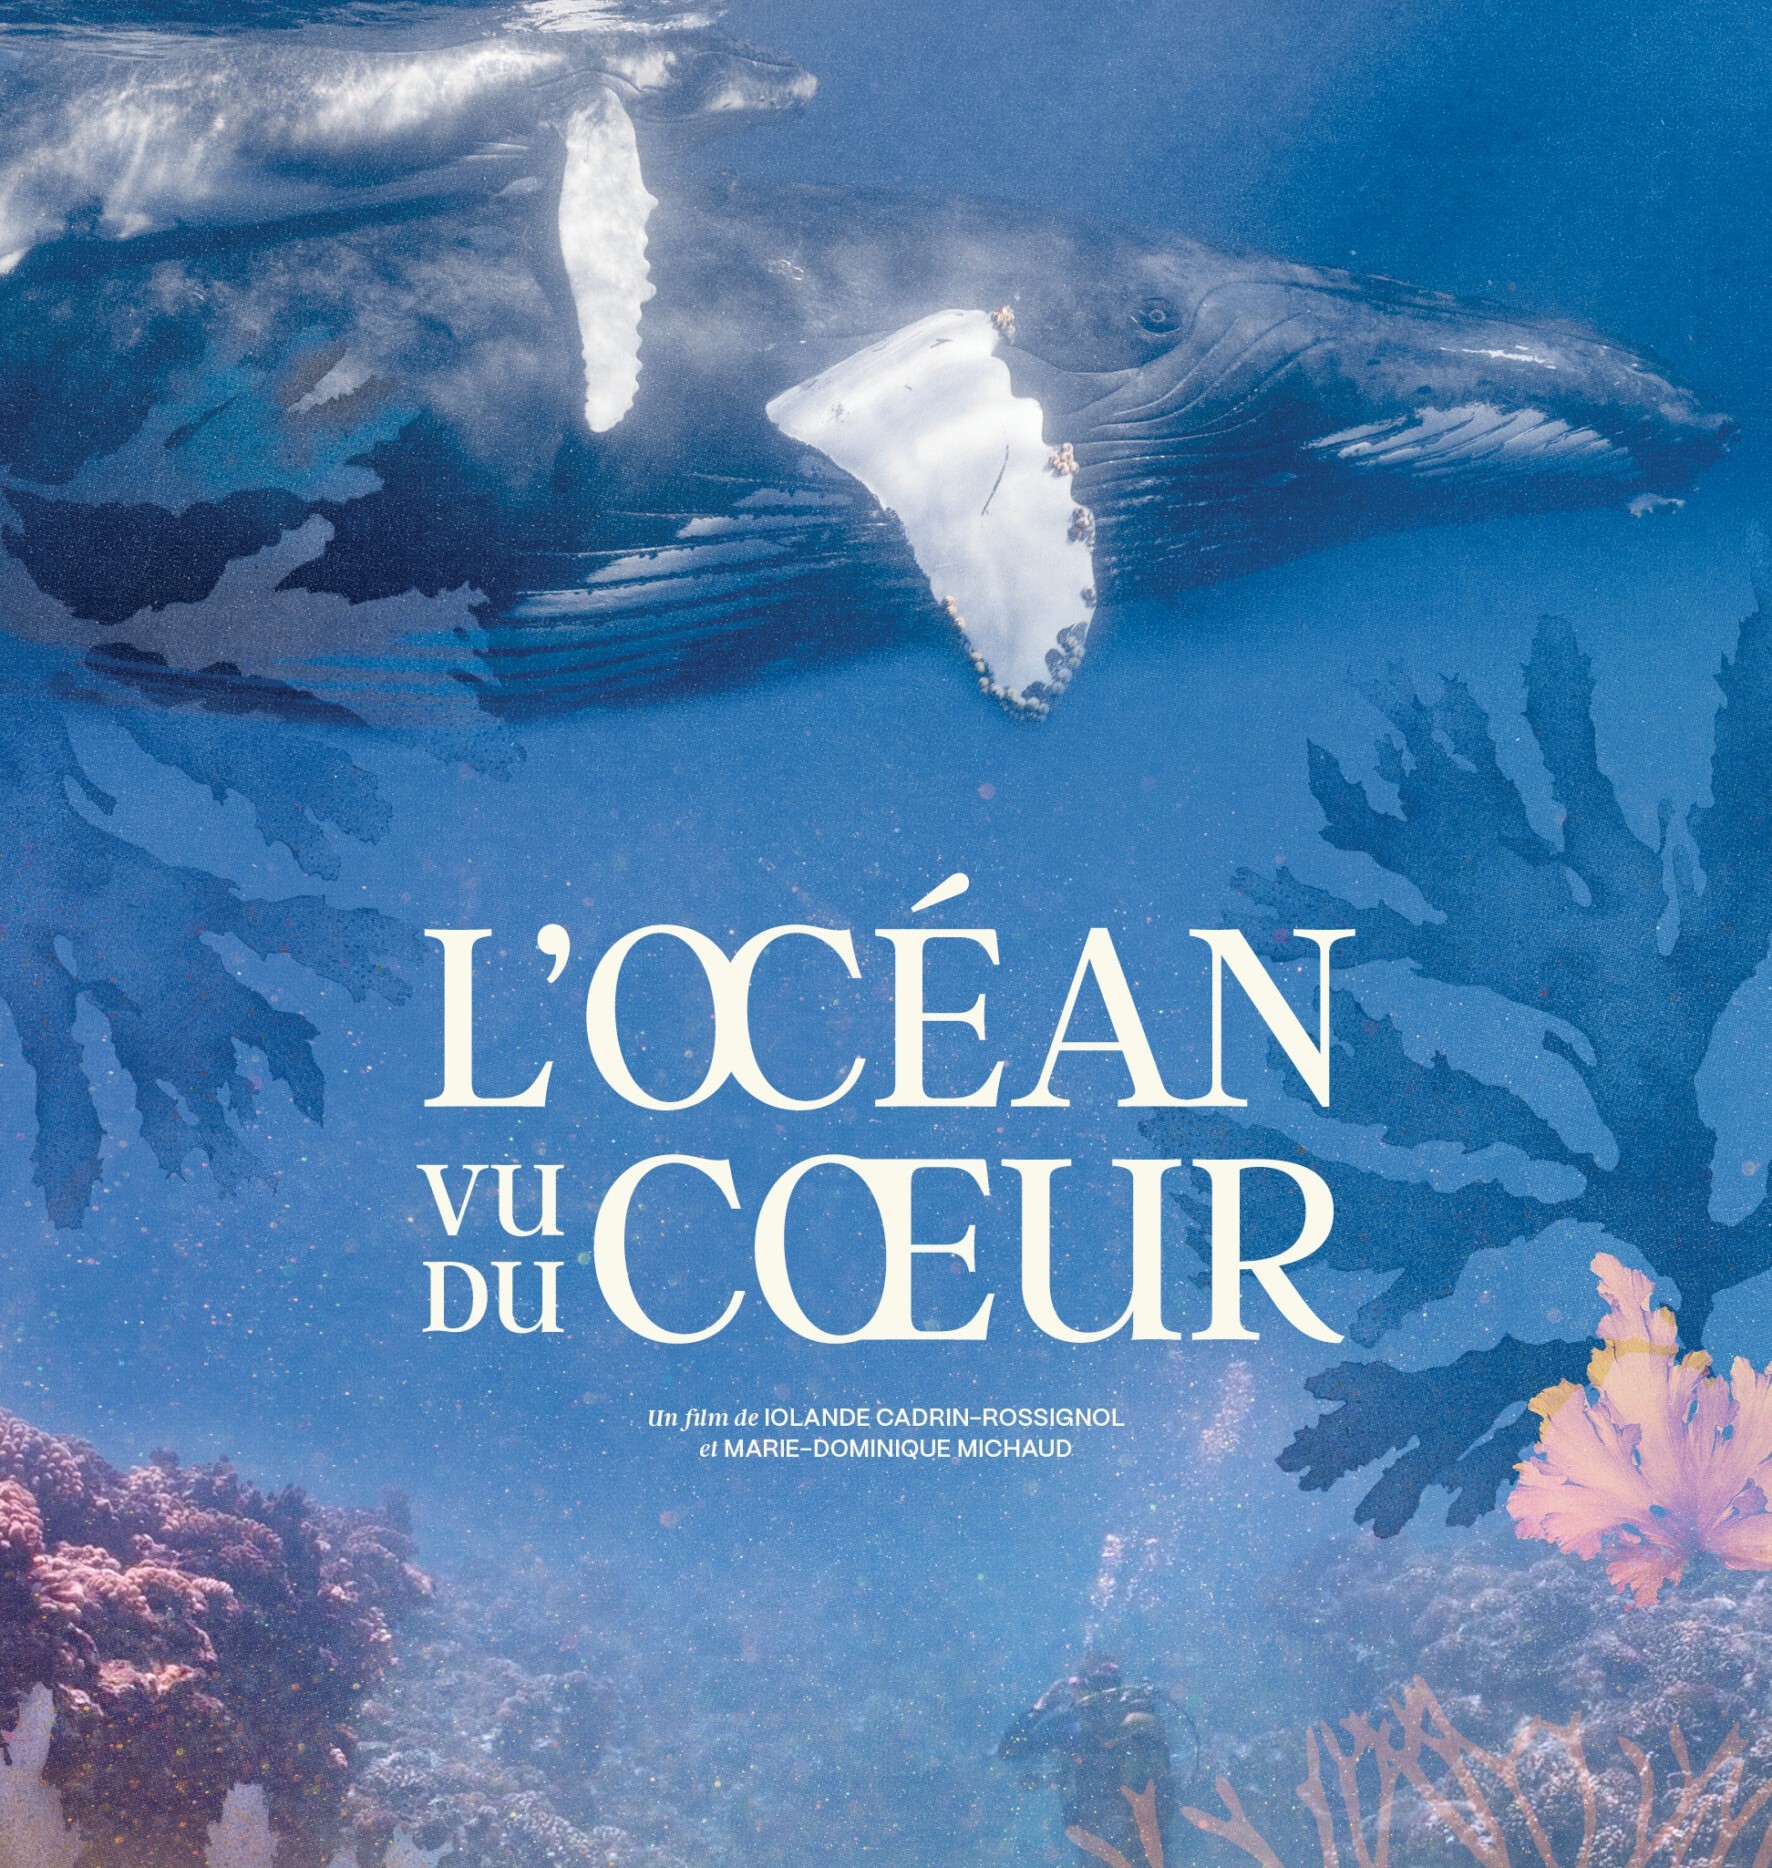 Ocean looks from the heart in a film discussion